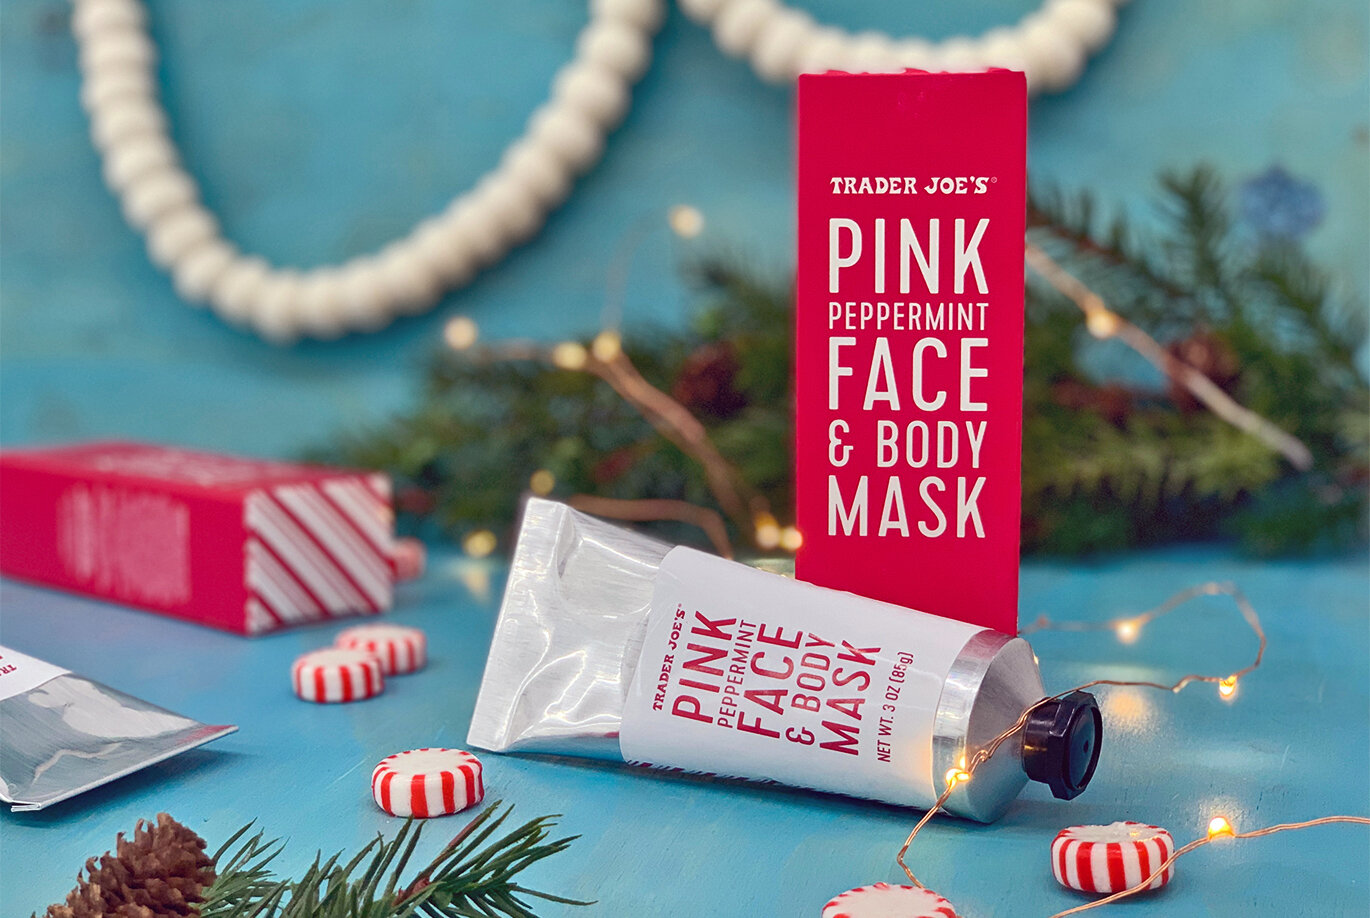 Peppermint face mask